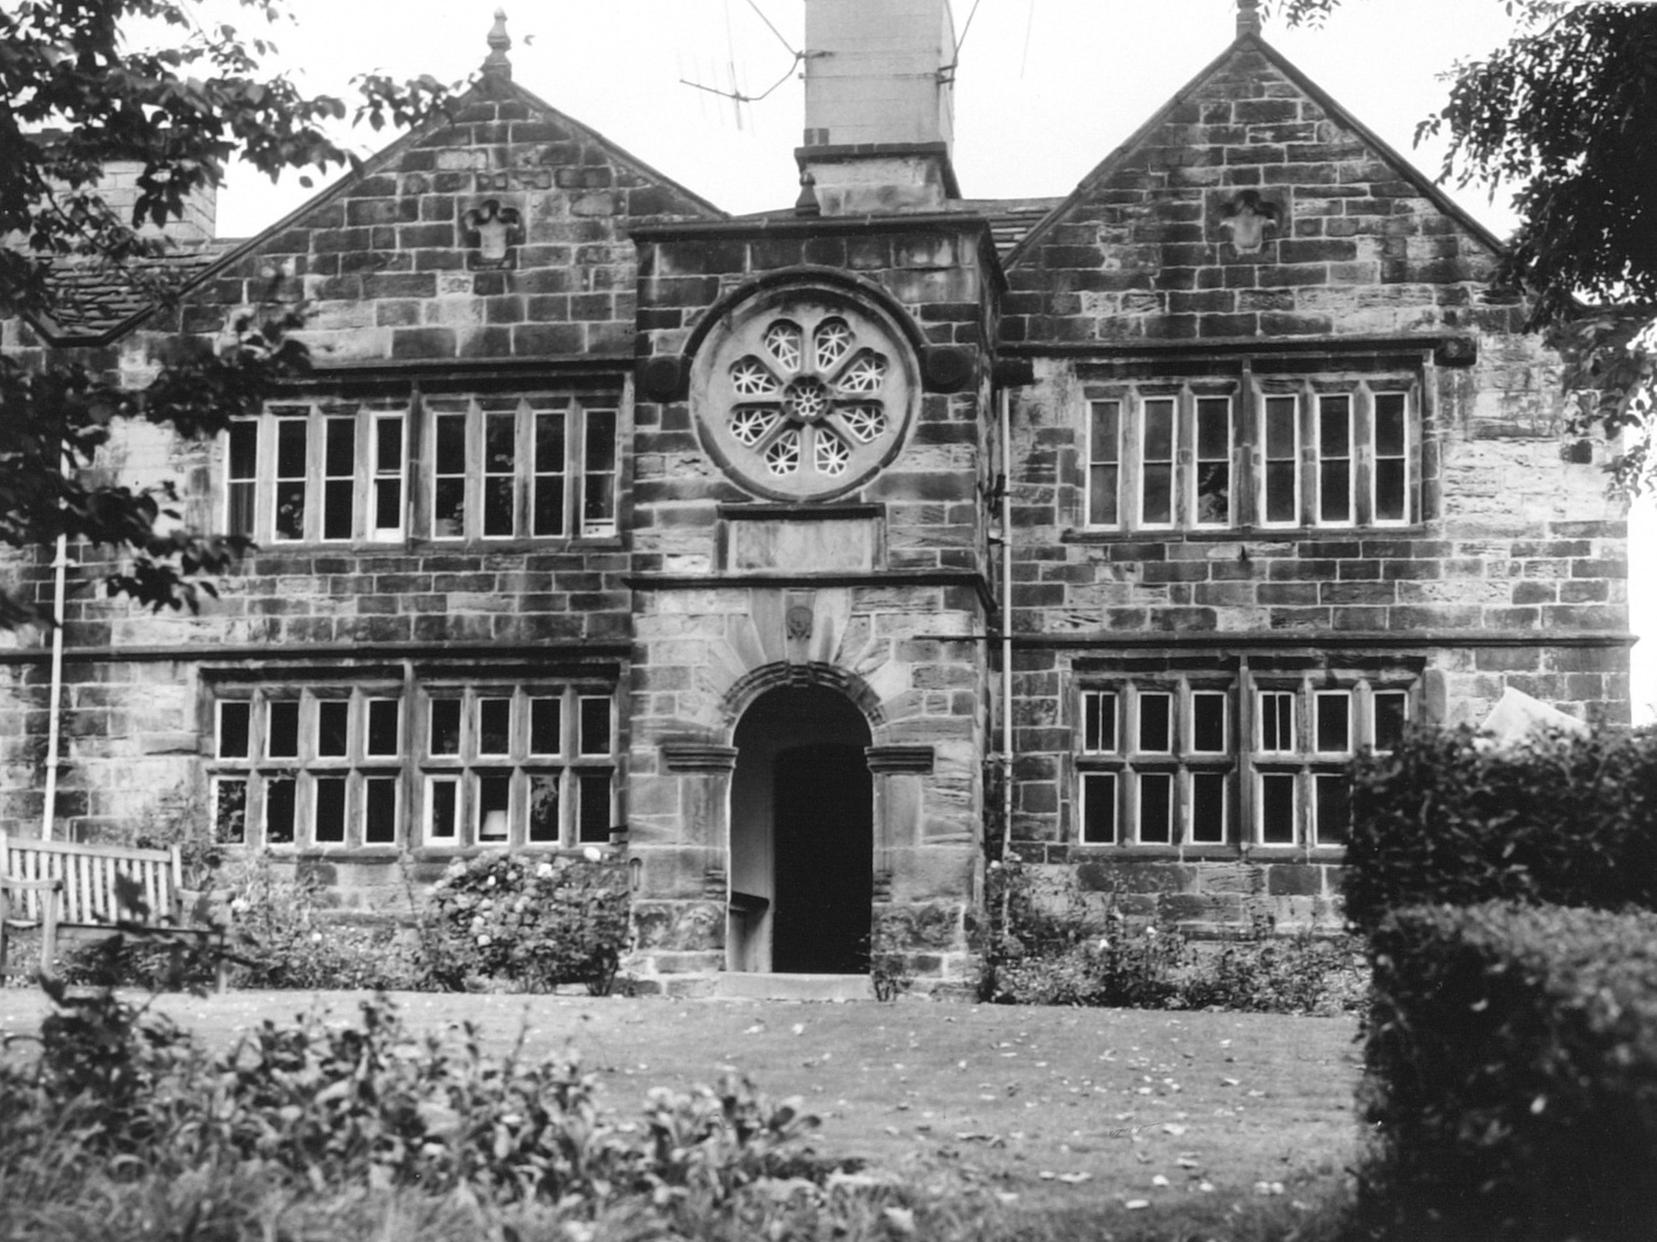 People have claimed that a ghost haunts Lumb Hall, a grade II listed property near Drighlington. Witnesses say the ghost is a figure dressed in Civil War uniform that makes a shuffling sound near the front door.